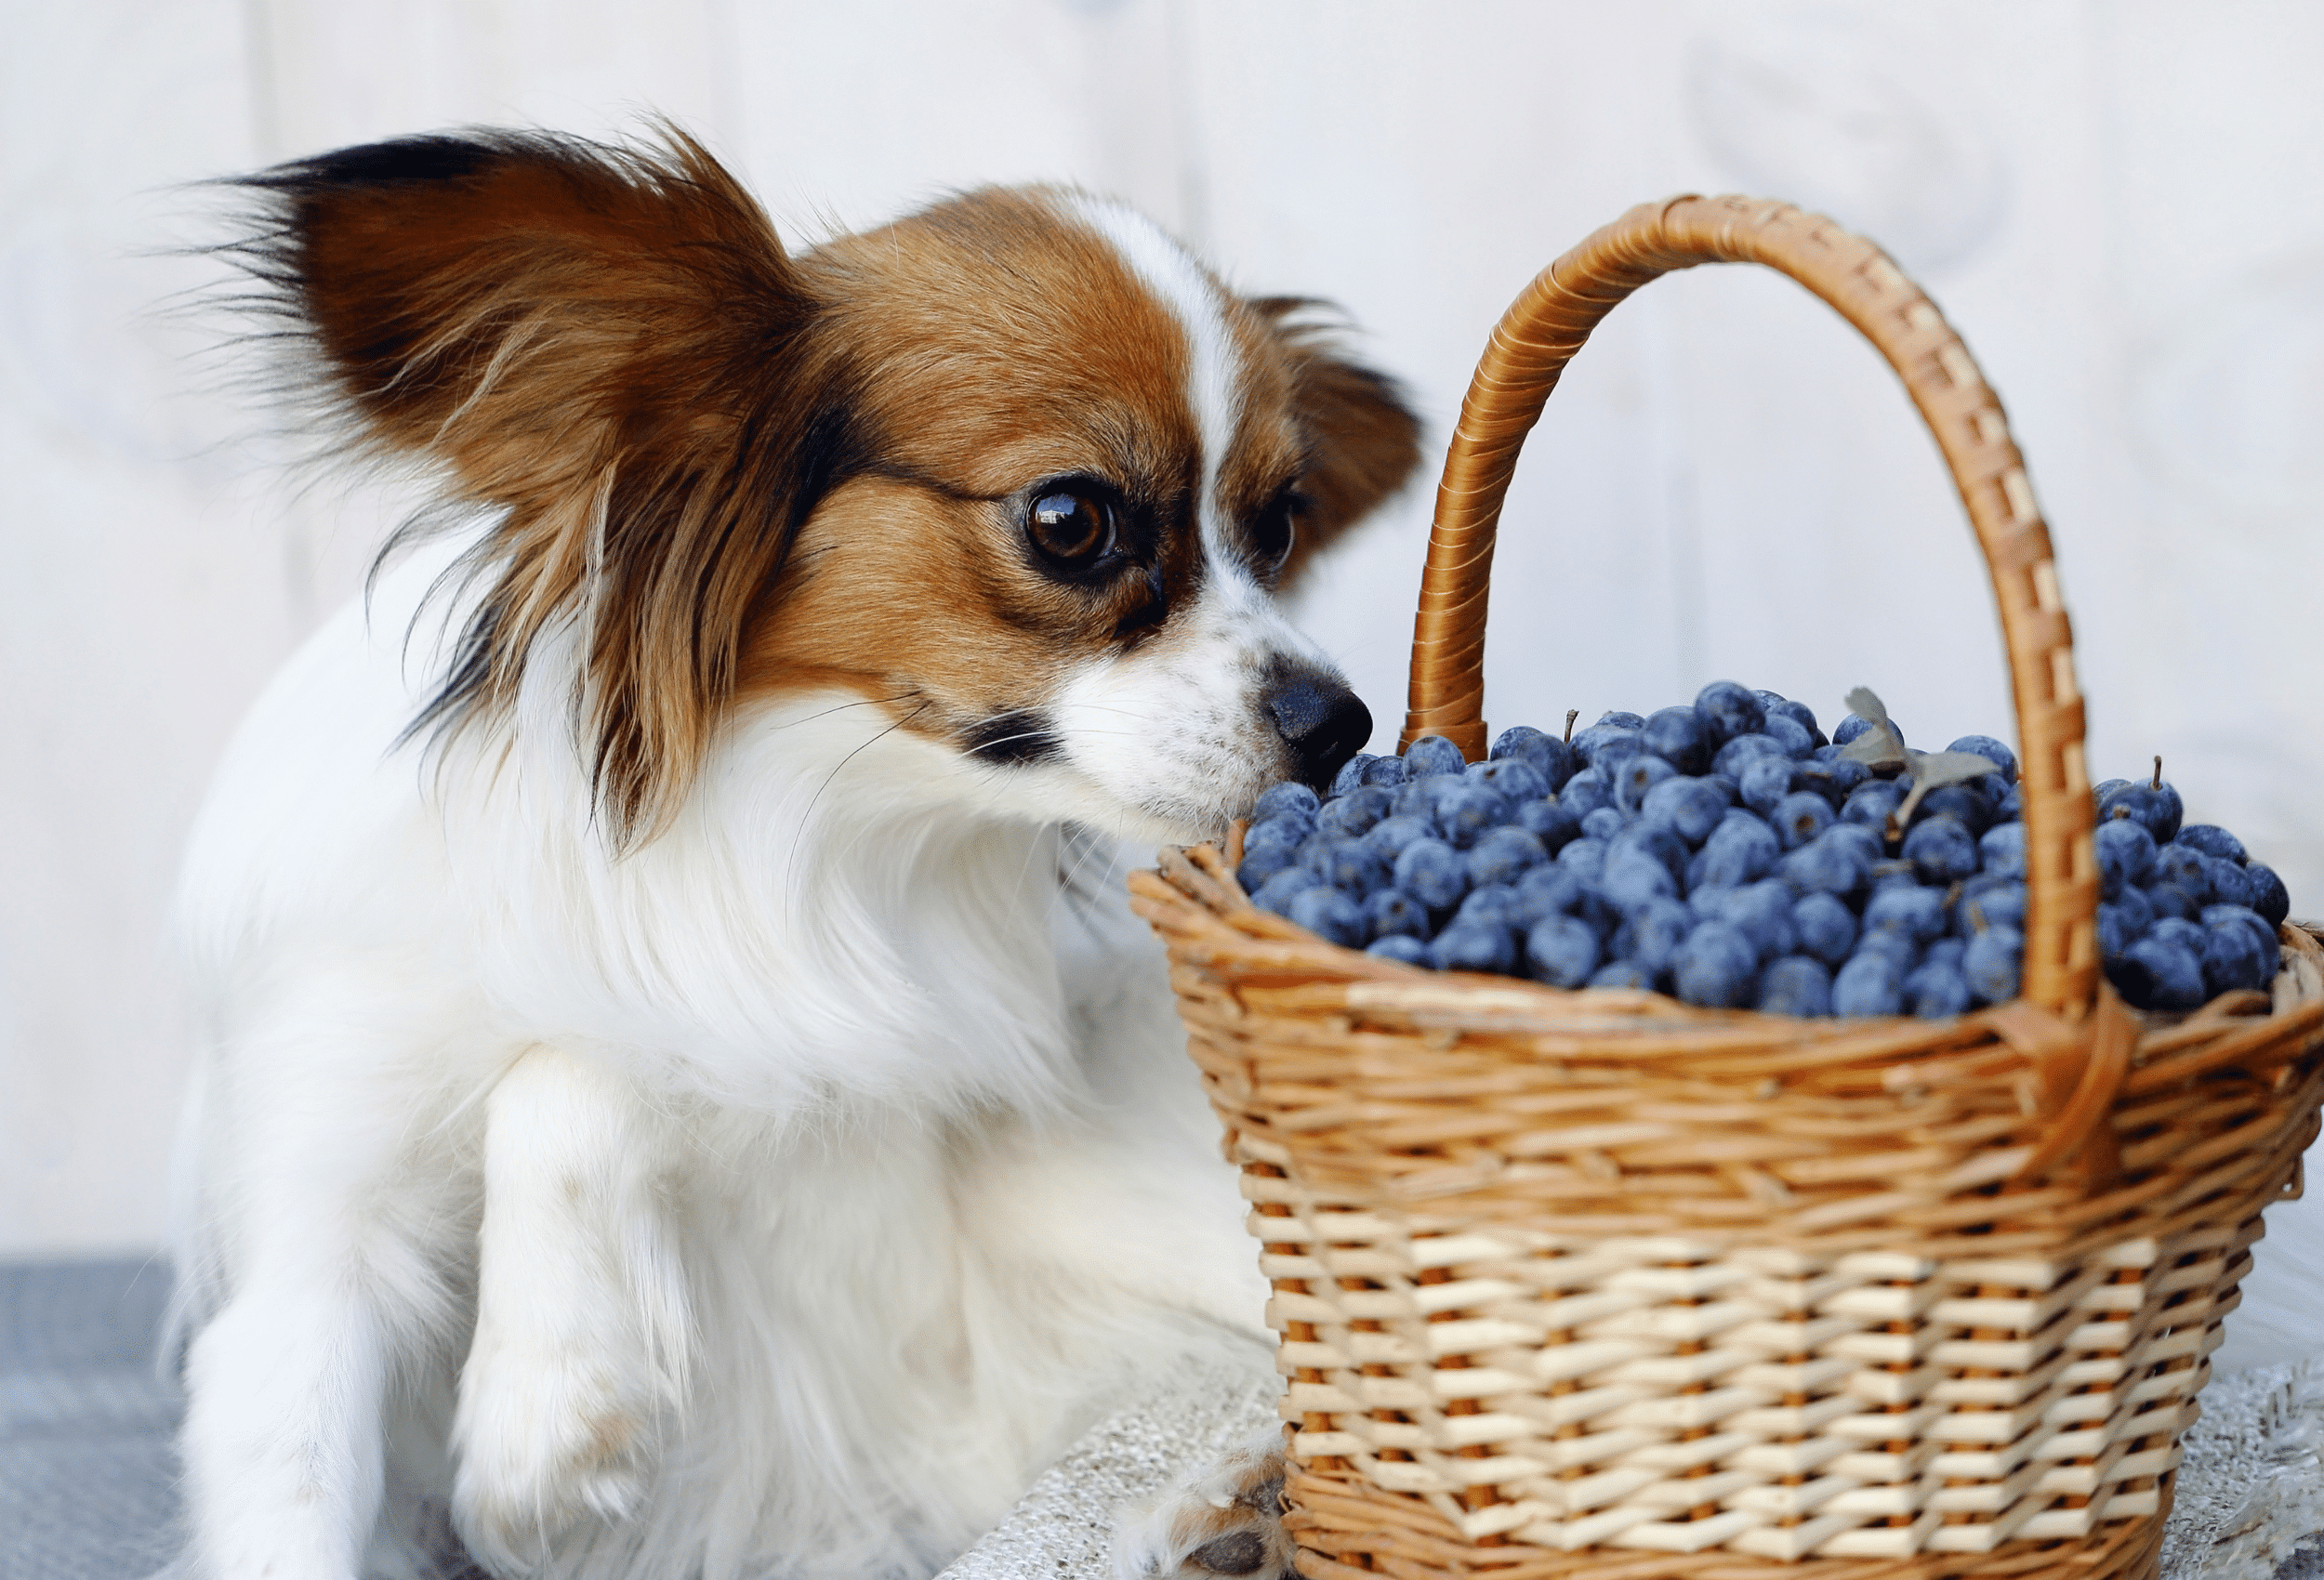 A curious dog investigating a basket of blueberries with its nose, captivated by the scent of the fresh fruit